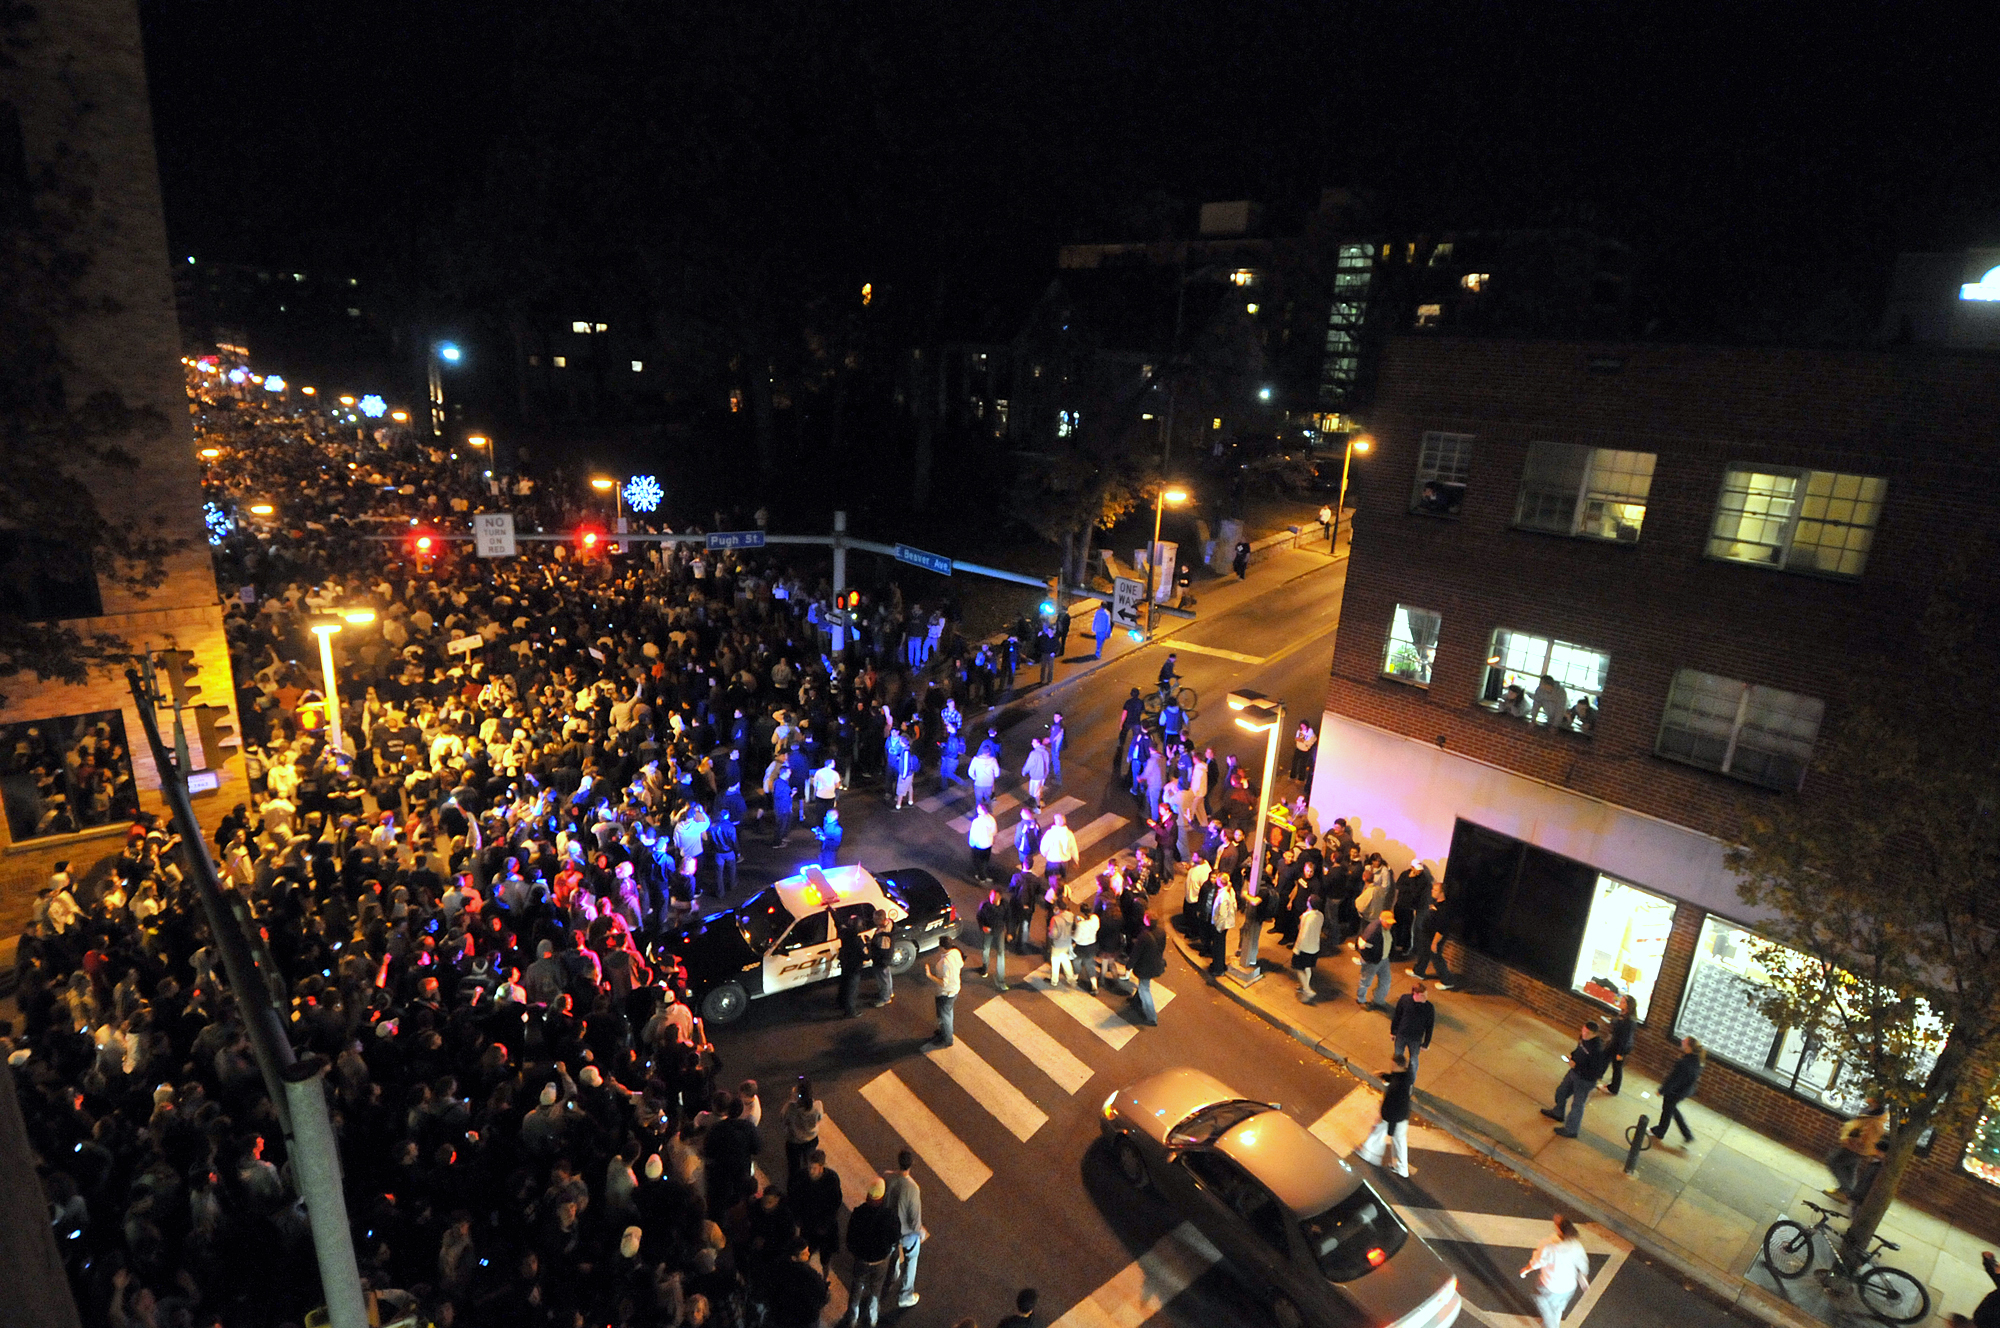  Students flooded onto Beaver Avenue on Wednesday, Nov. 9, 2011 from Old Main to protest the firing of Joe Paterno. This intersection, at Beaver and Pugh, was blocked off by police vehicles. Riot police were on standby during the press conference in 